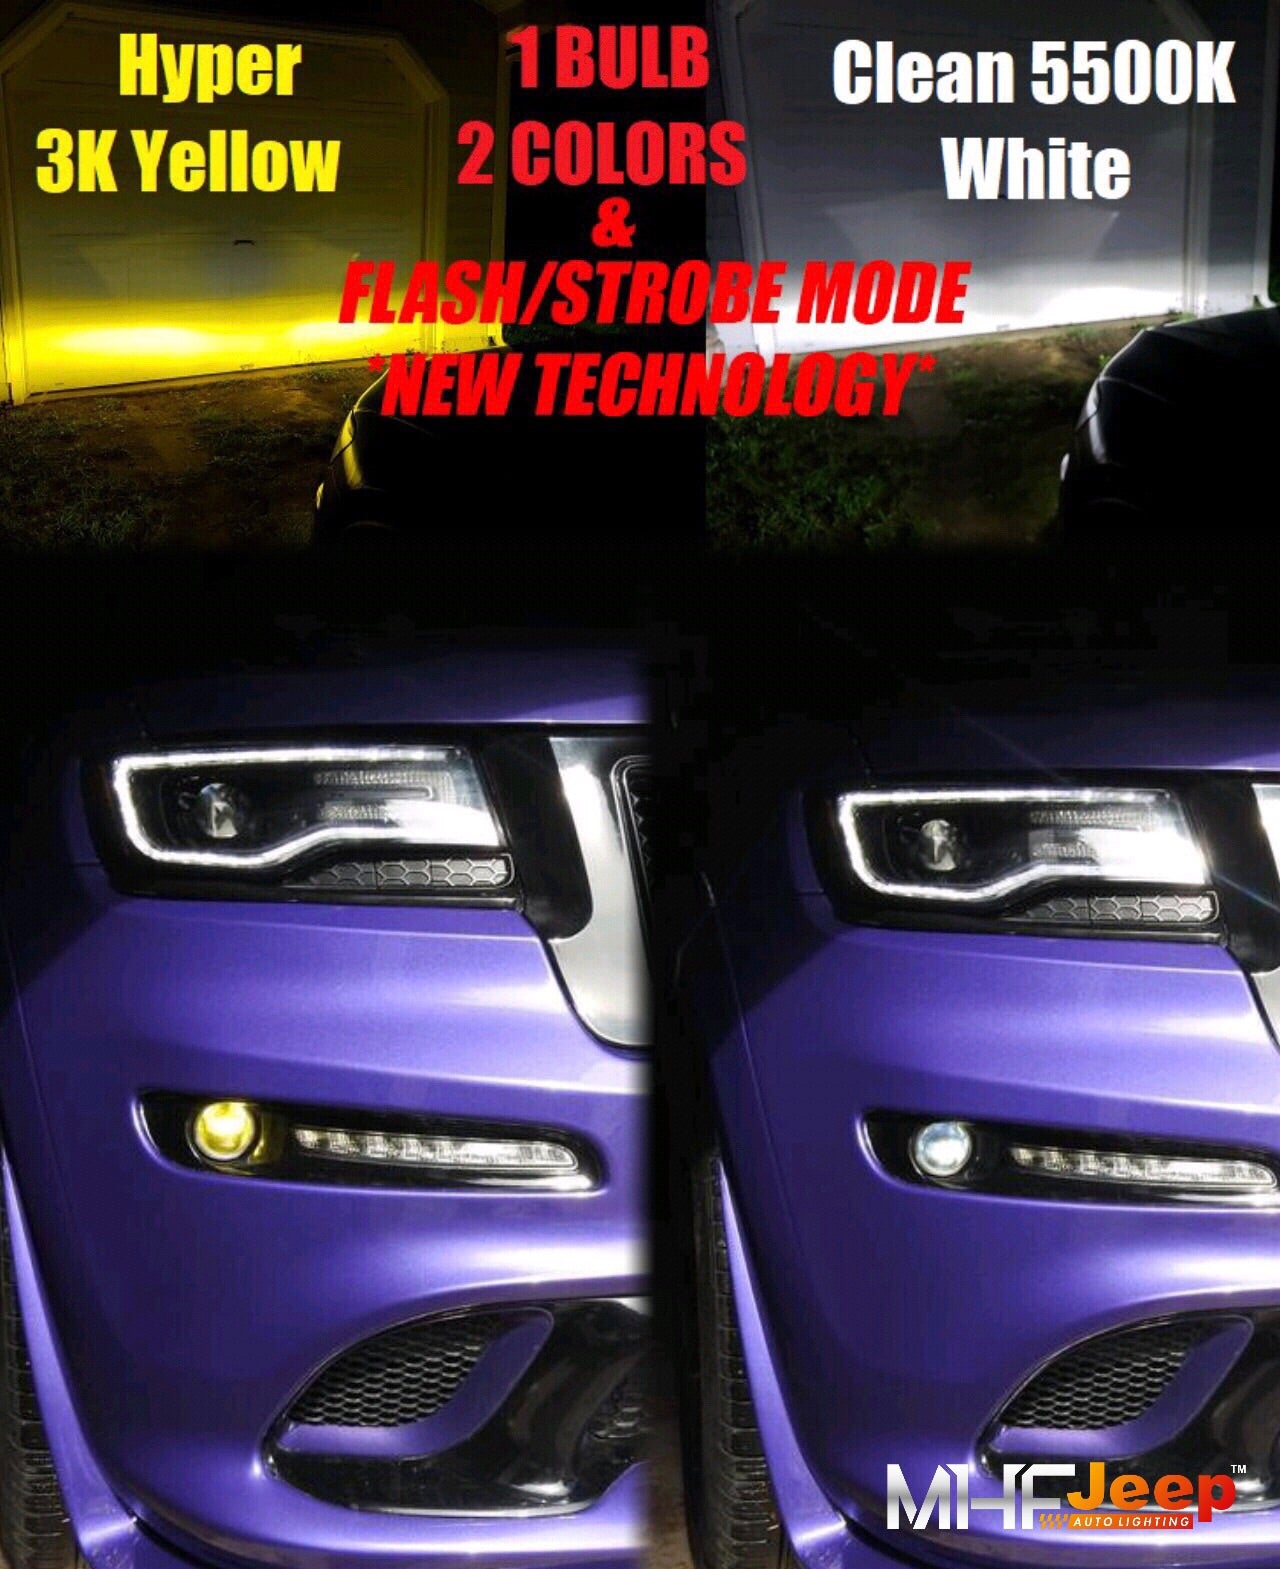 Dual Color LED Fog [1 bulb 2 colors] Choose between a Clean White & Hyper 3000k Yellow